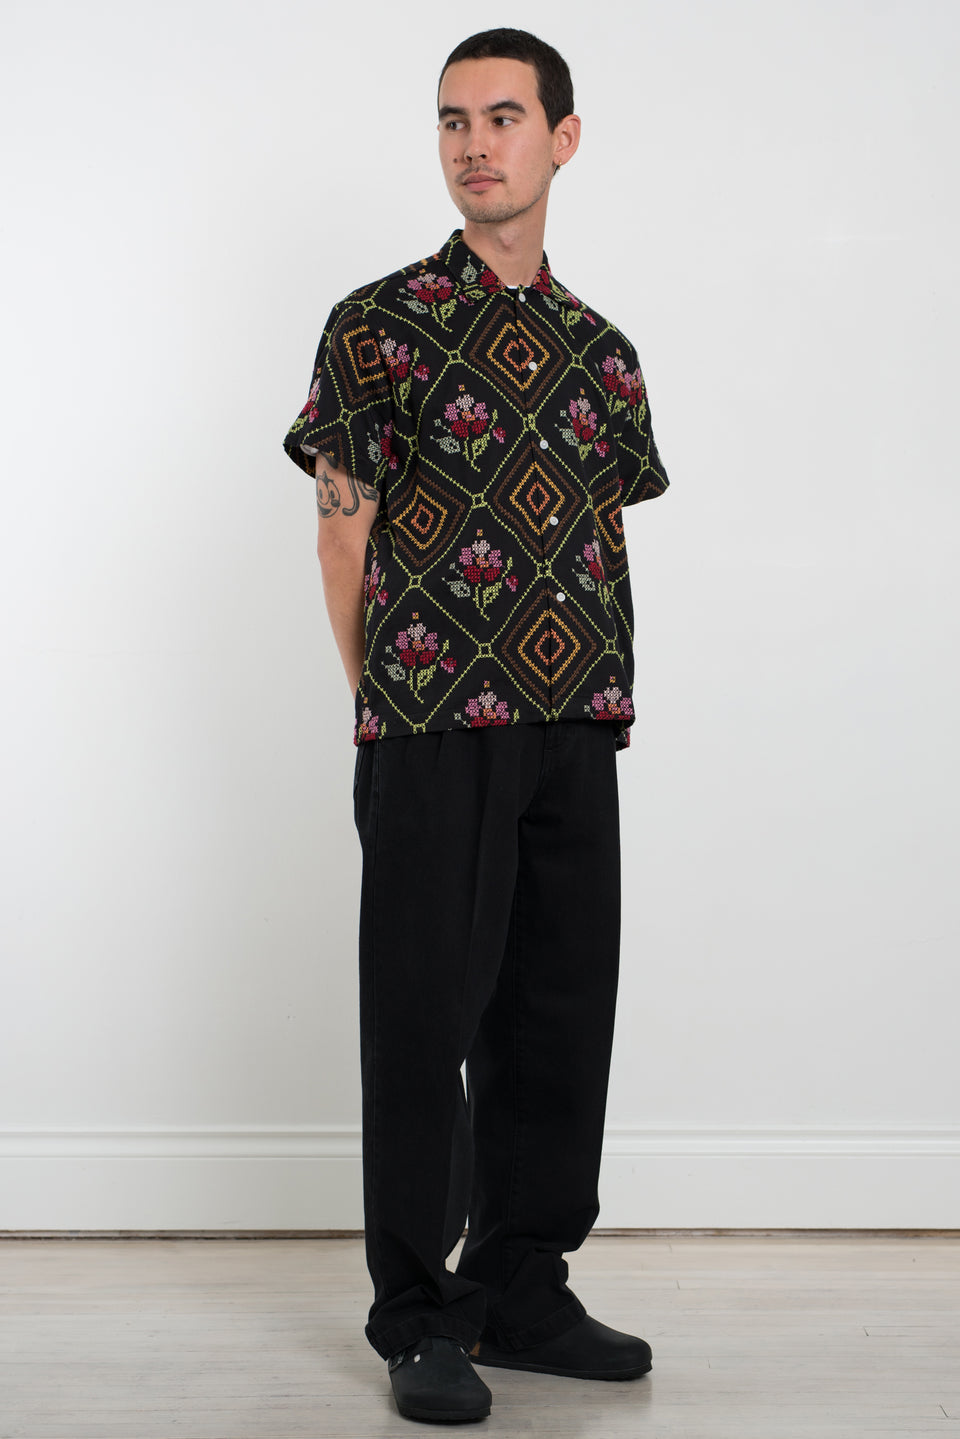 Bode New York PF22 Needlepoint Begonia SS Shirt Black Multi Calculus Victoria BC Canada